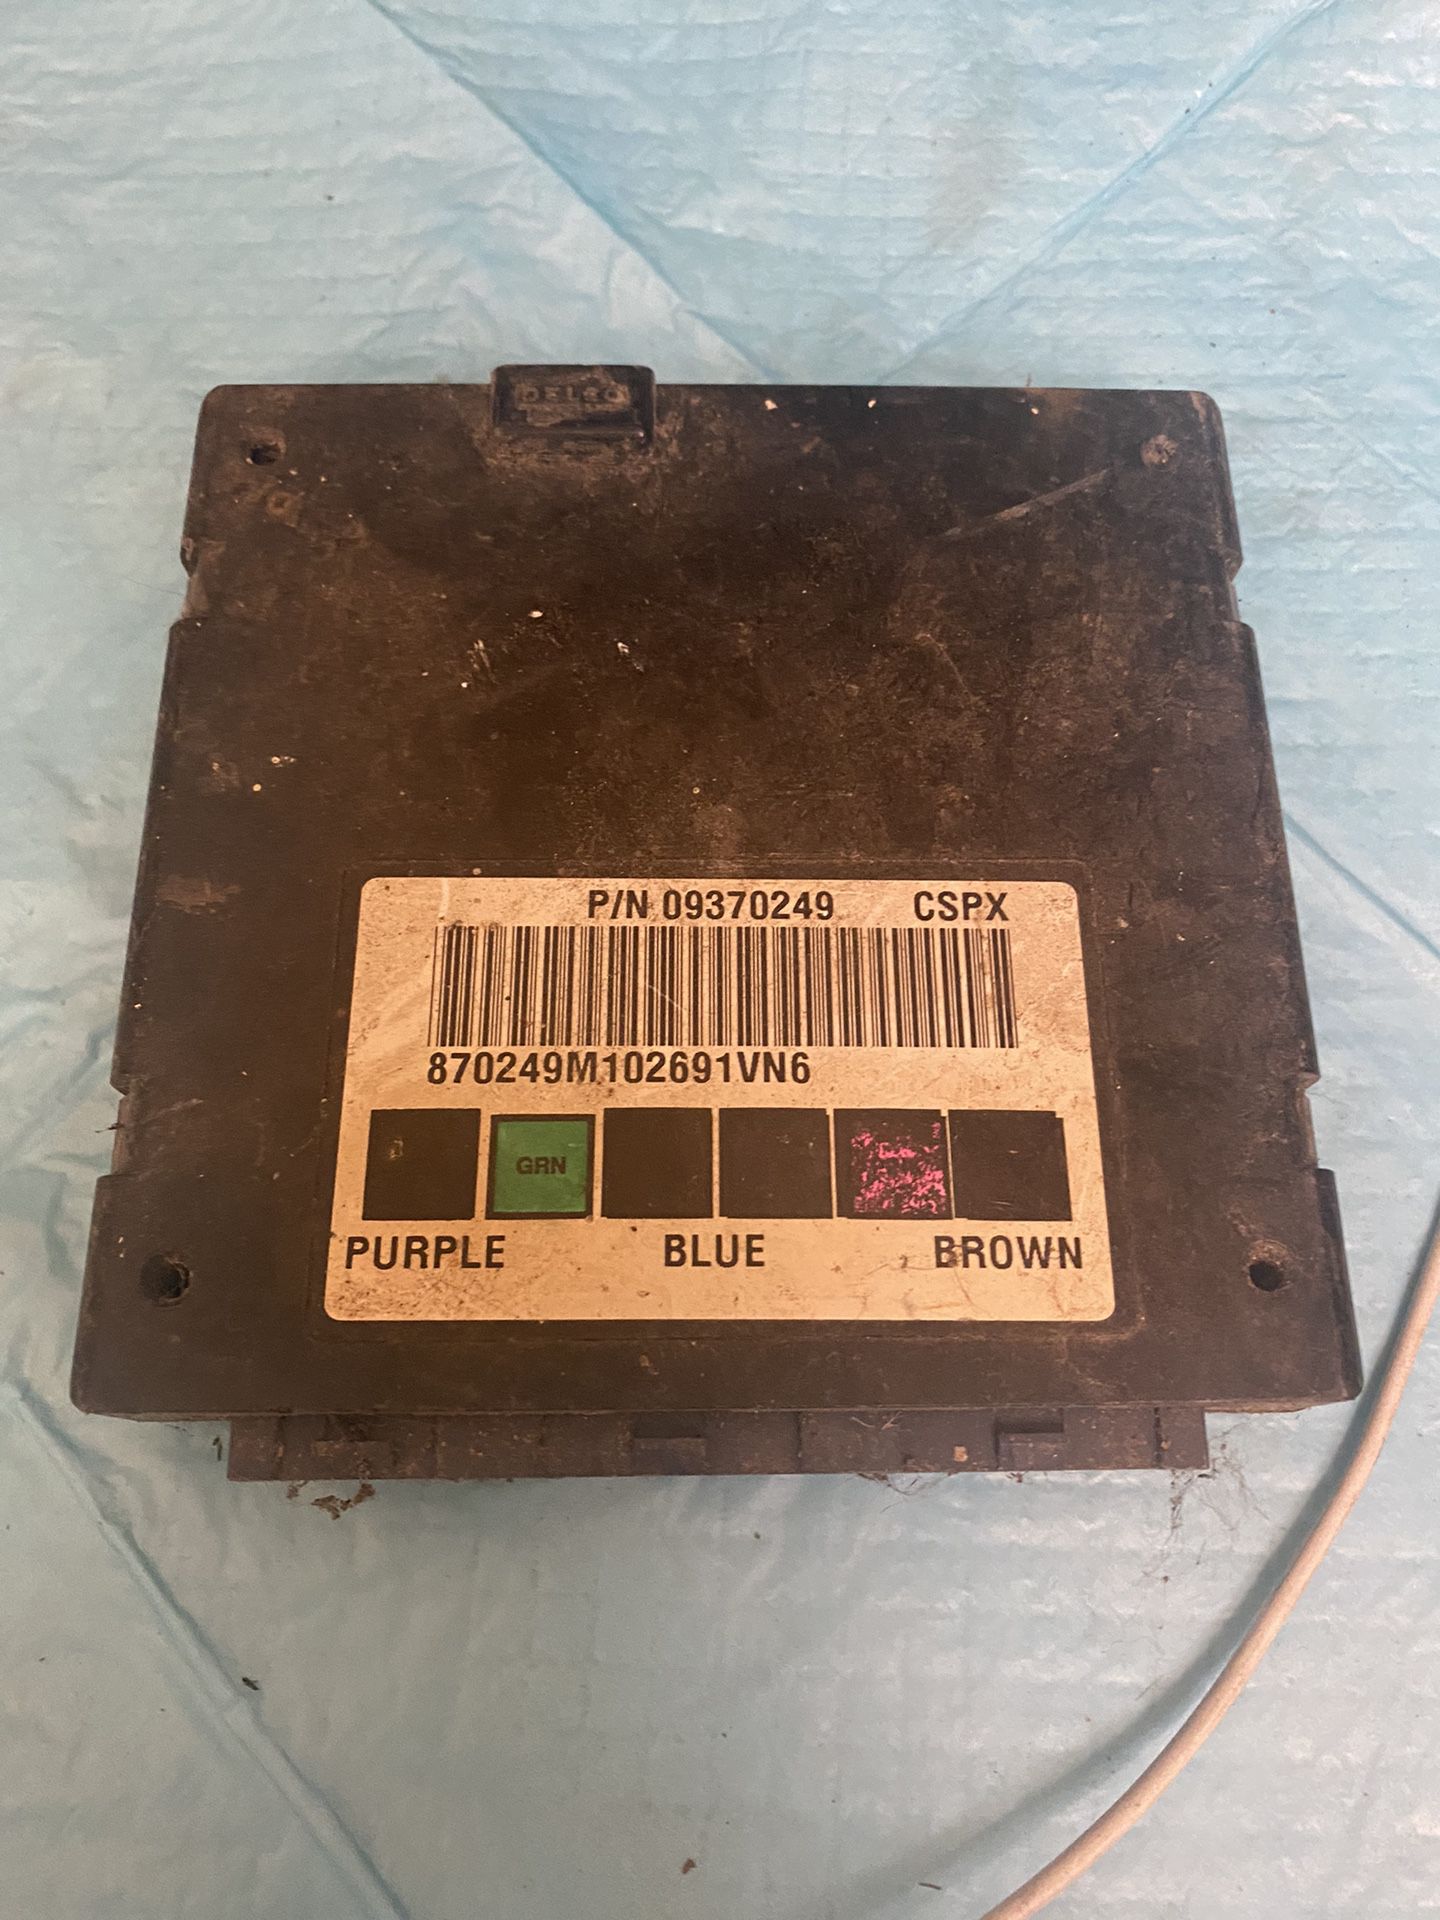 2000-2002 Tahoe or Yukon bcm body control module 0(contact info removed)